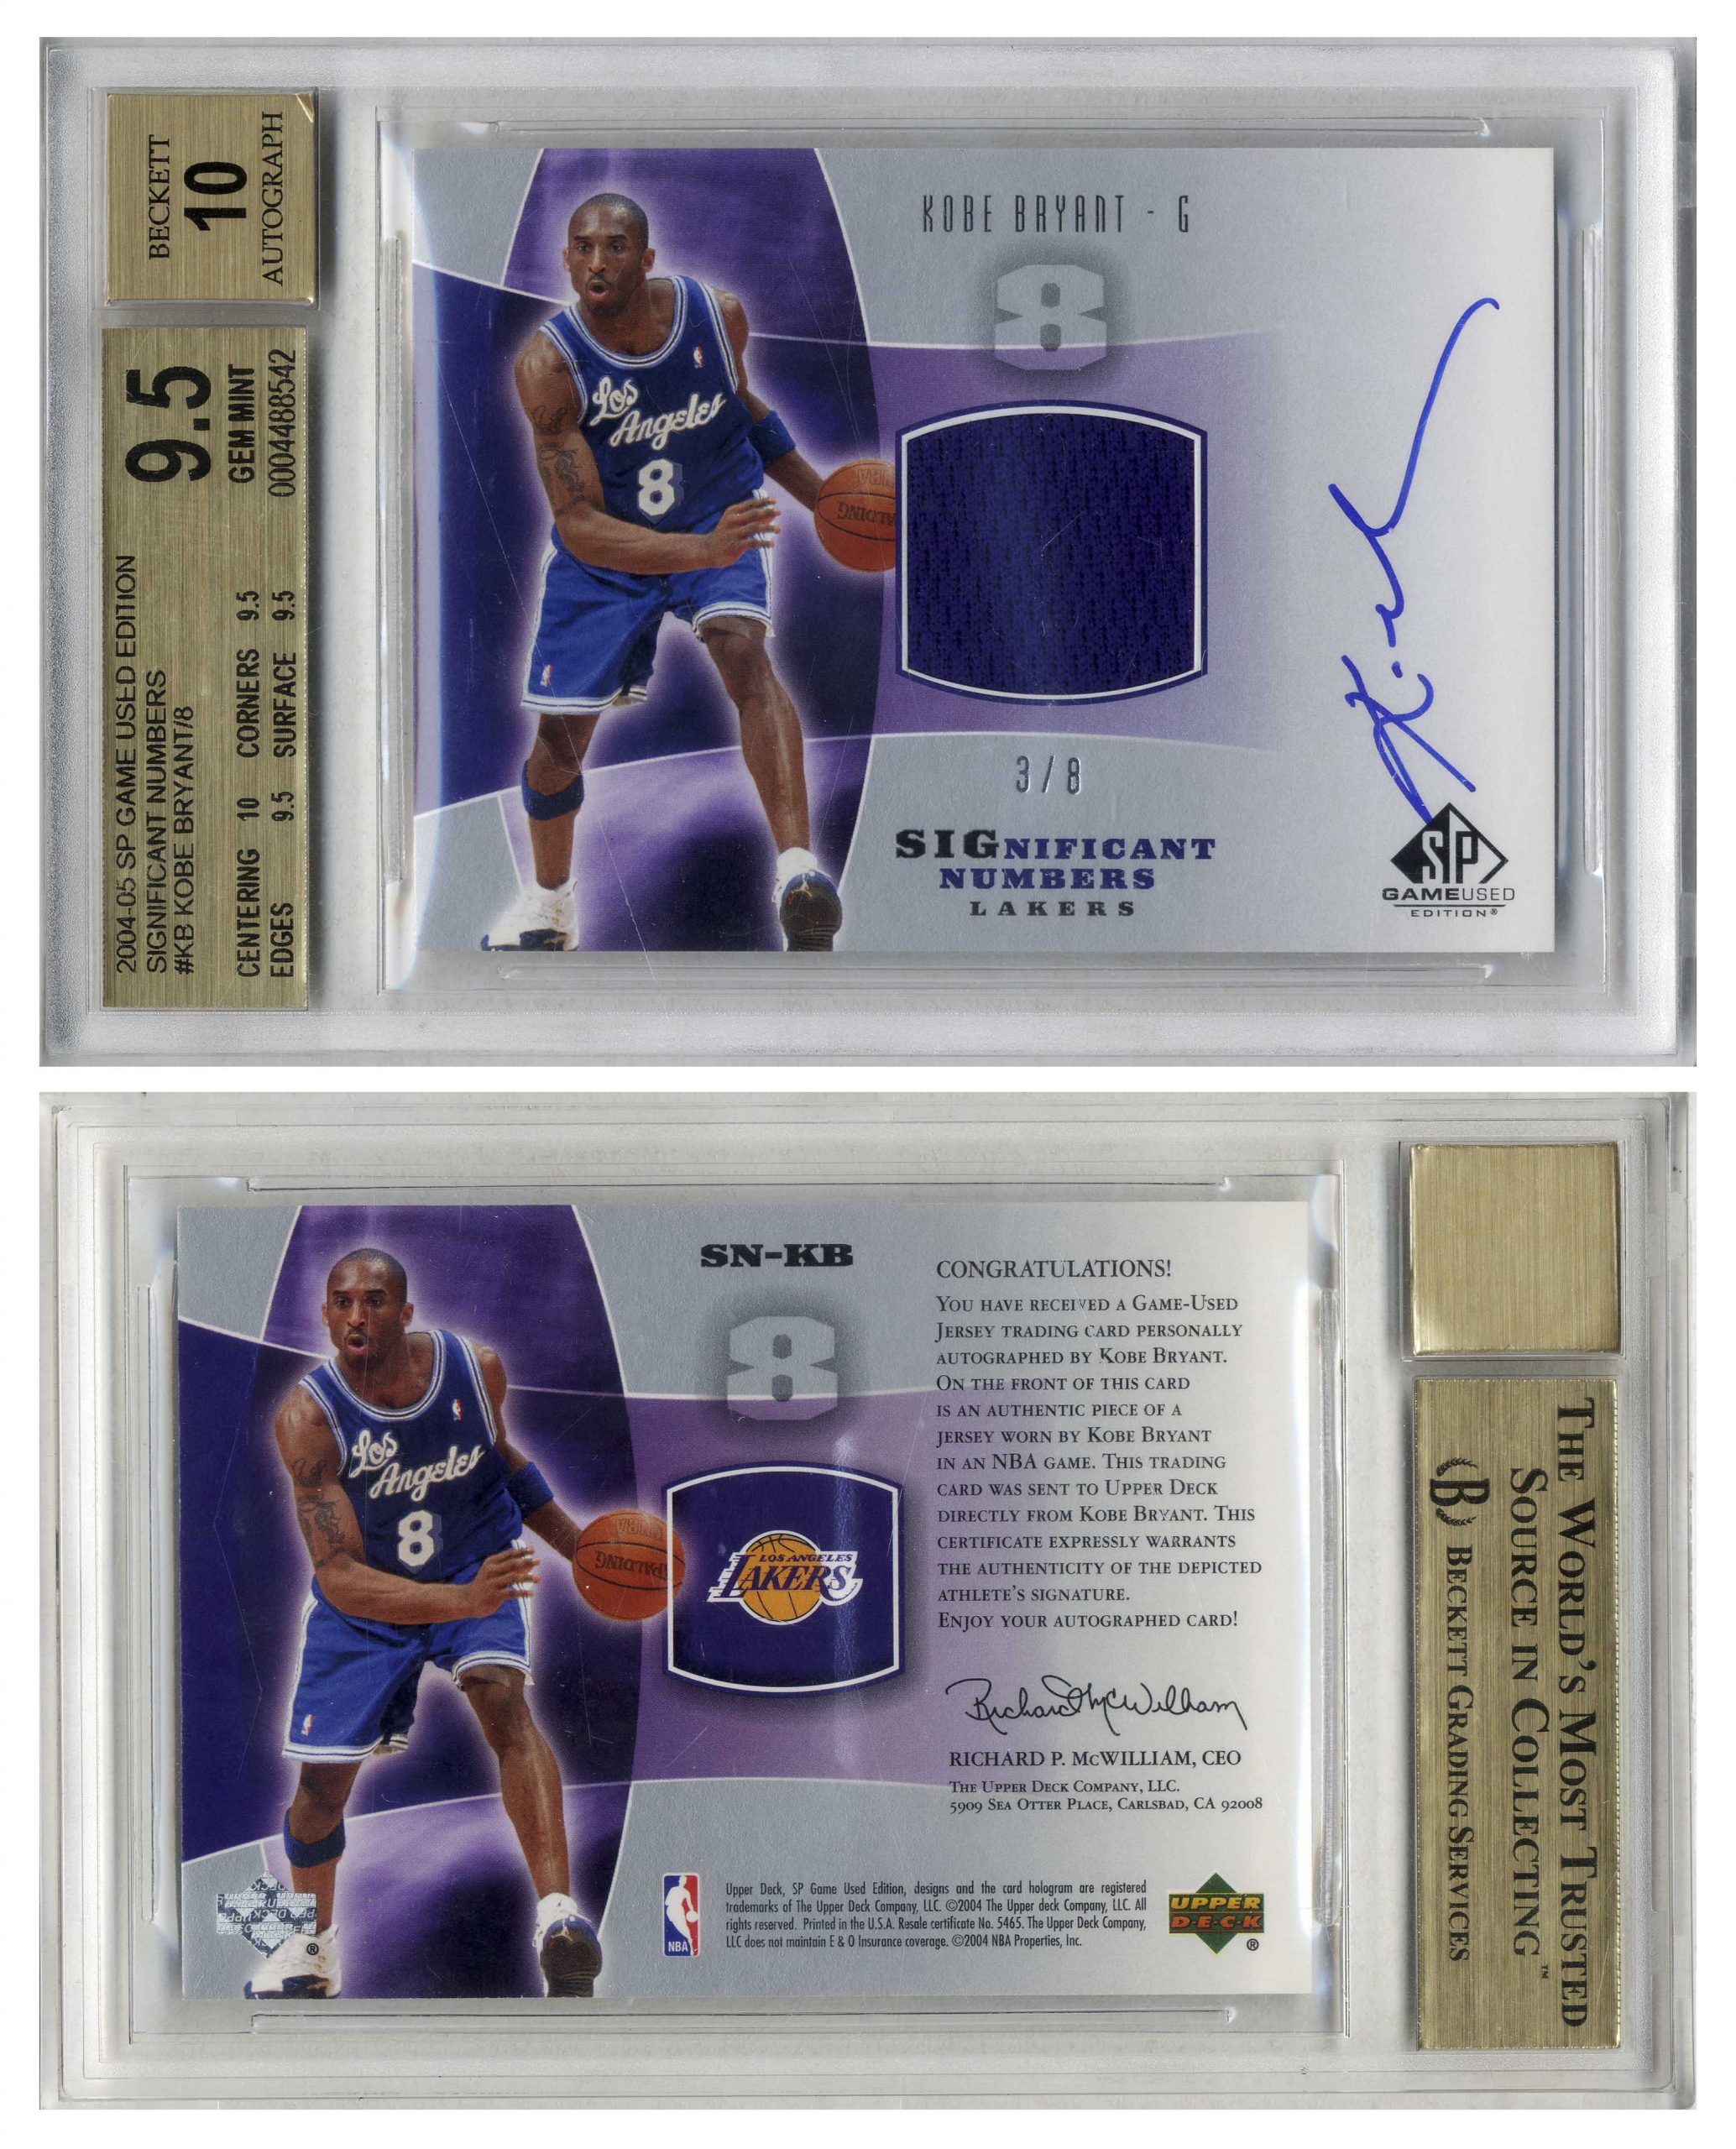 Sell a 1996 Finest Kobe Bryant #269 PSA 10 at Nate D Sanders Auctions